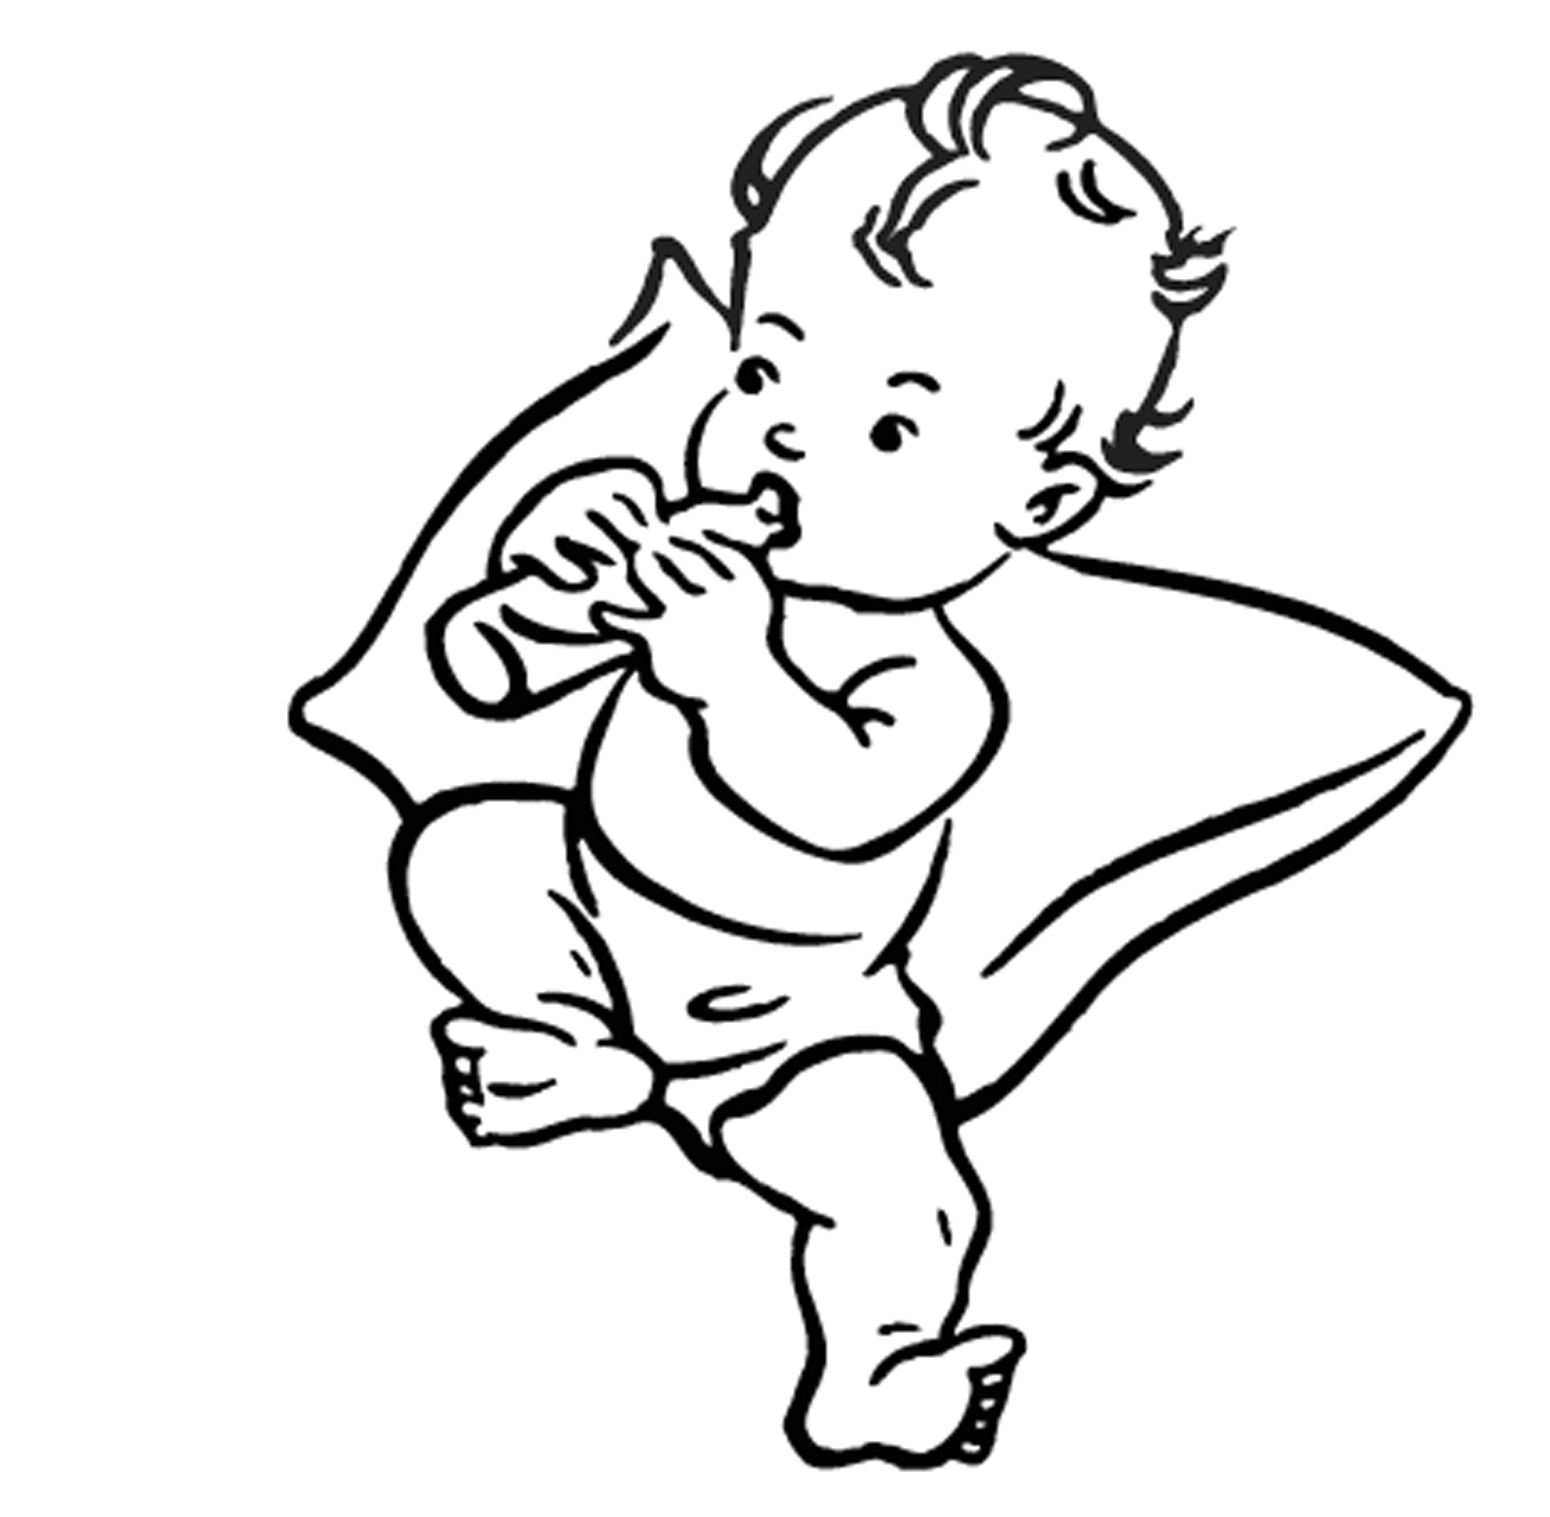 clipart baby black and white - photo #20